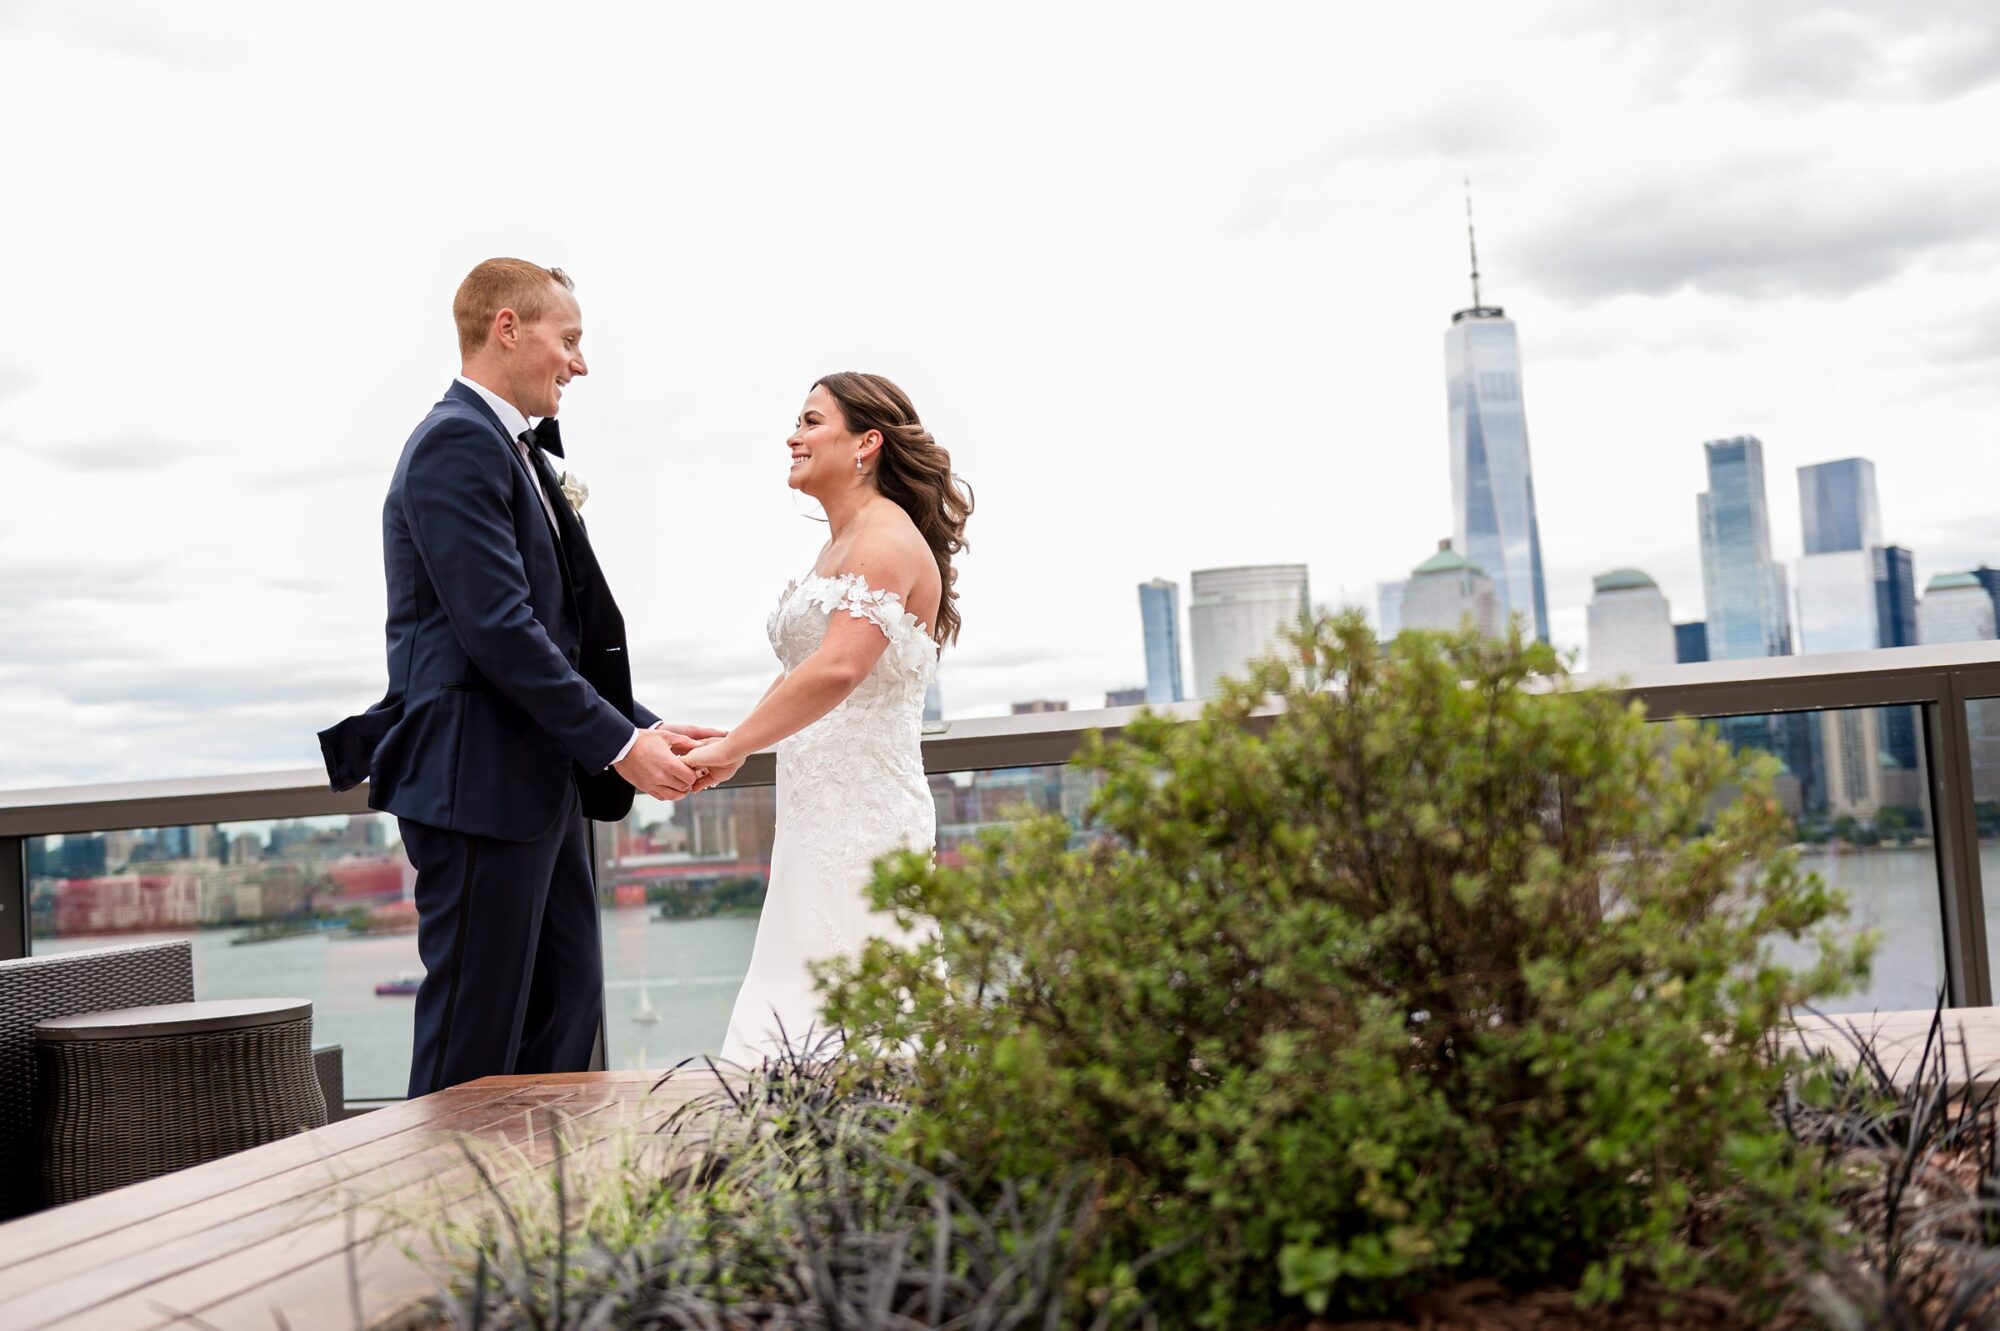 A bride and groom standing on a rooftop overlooking the city.